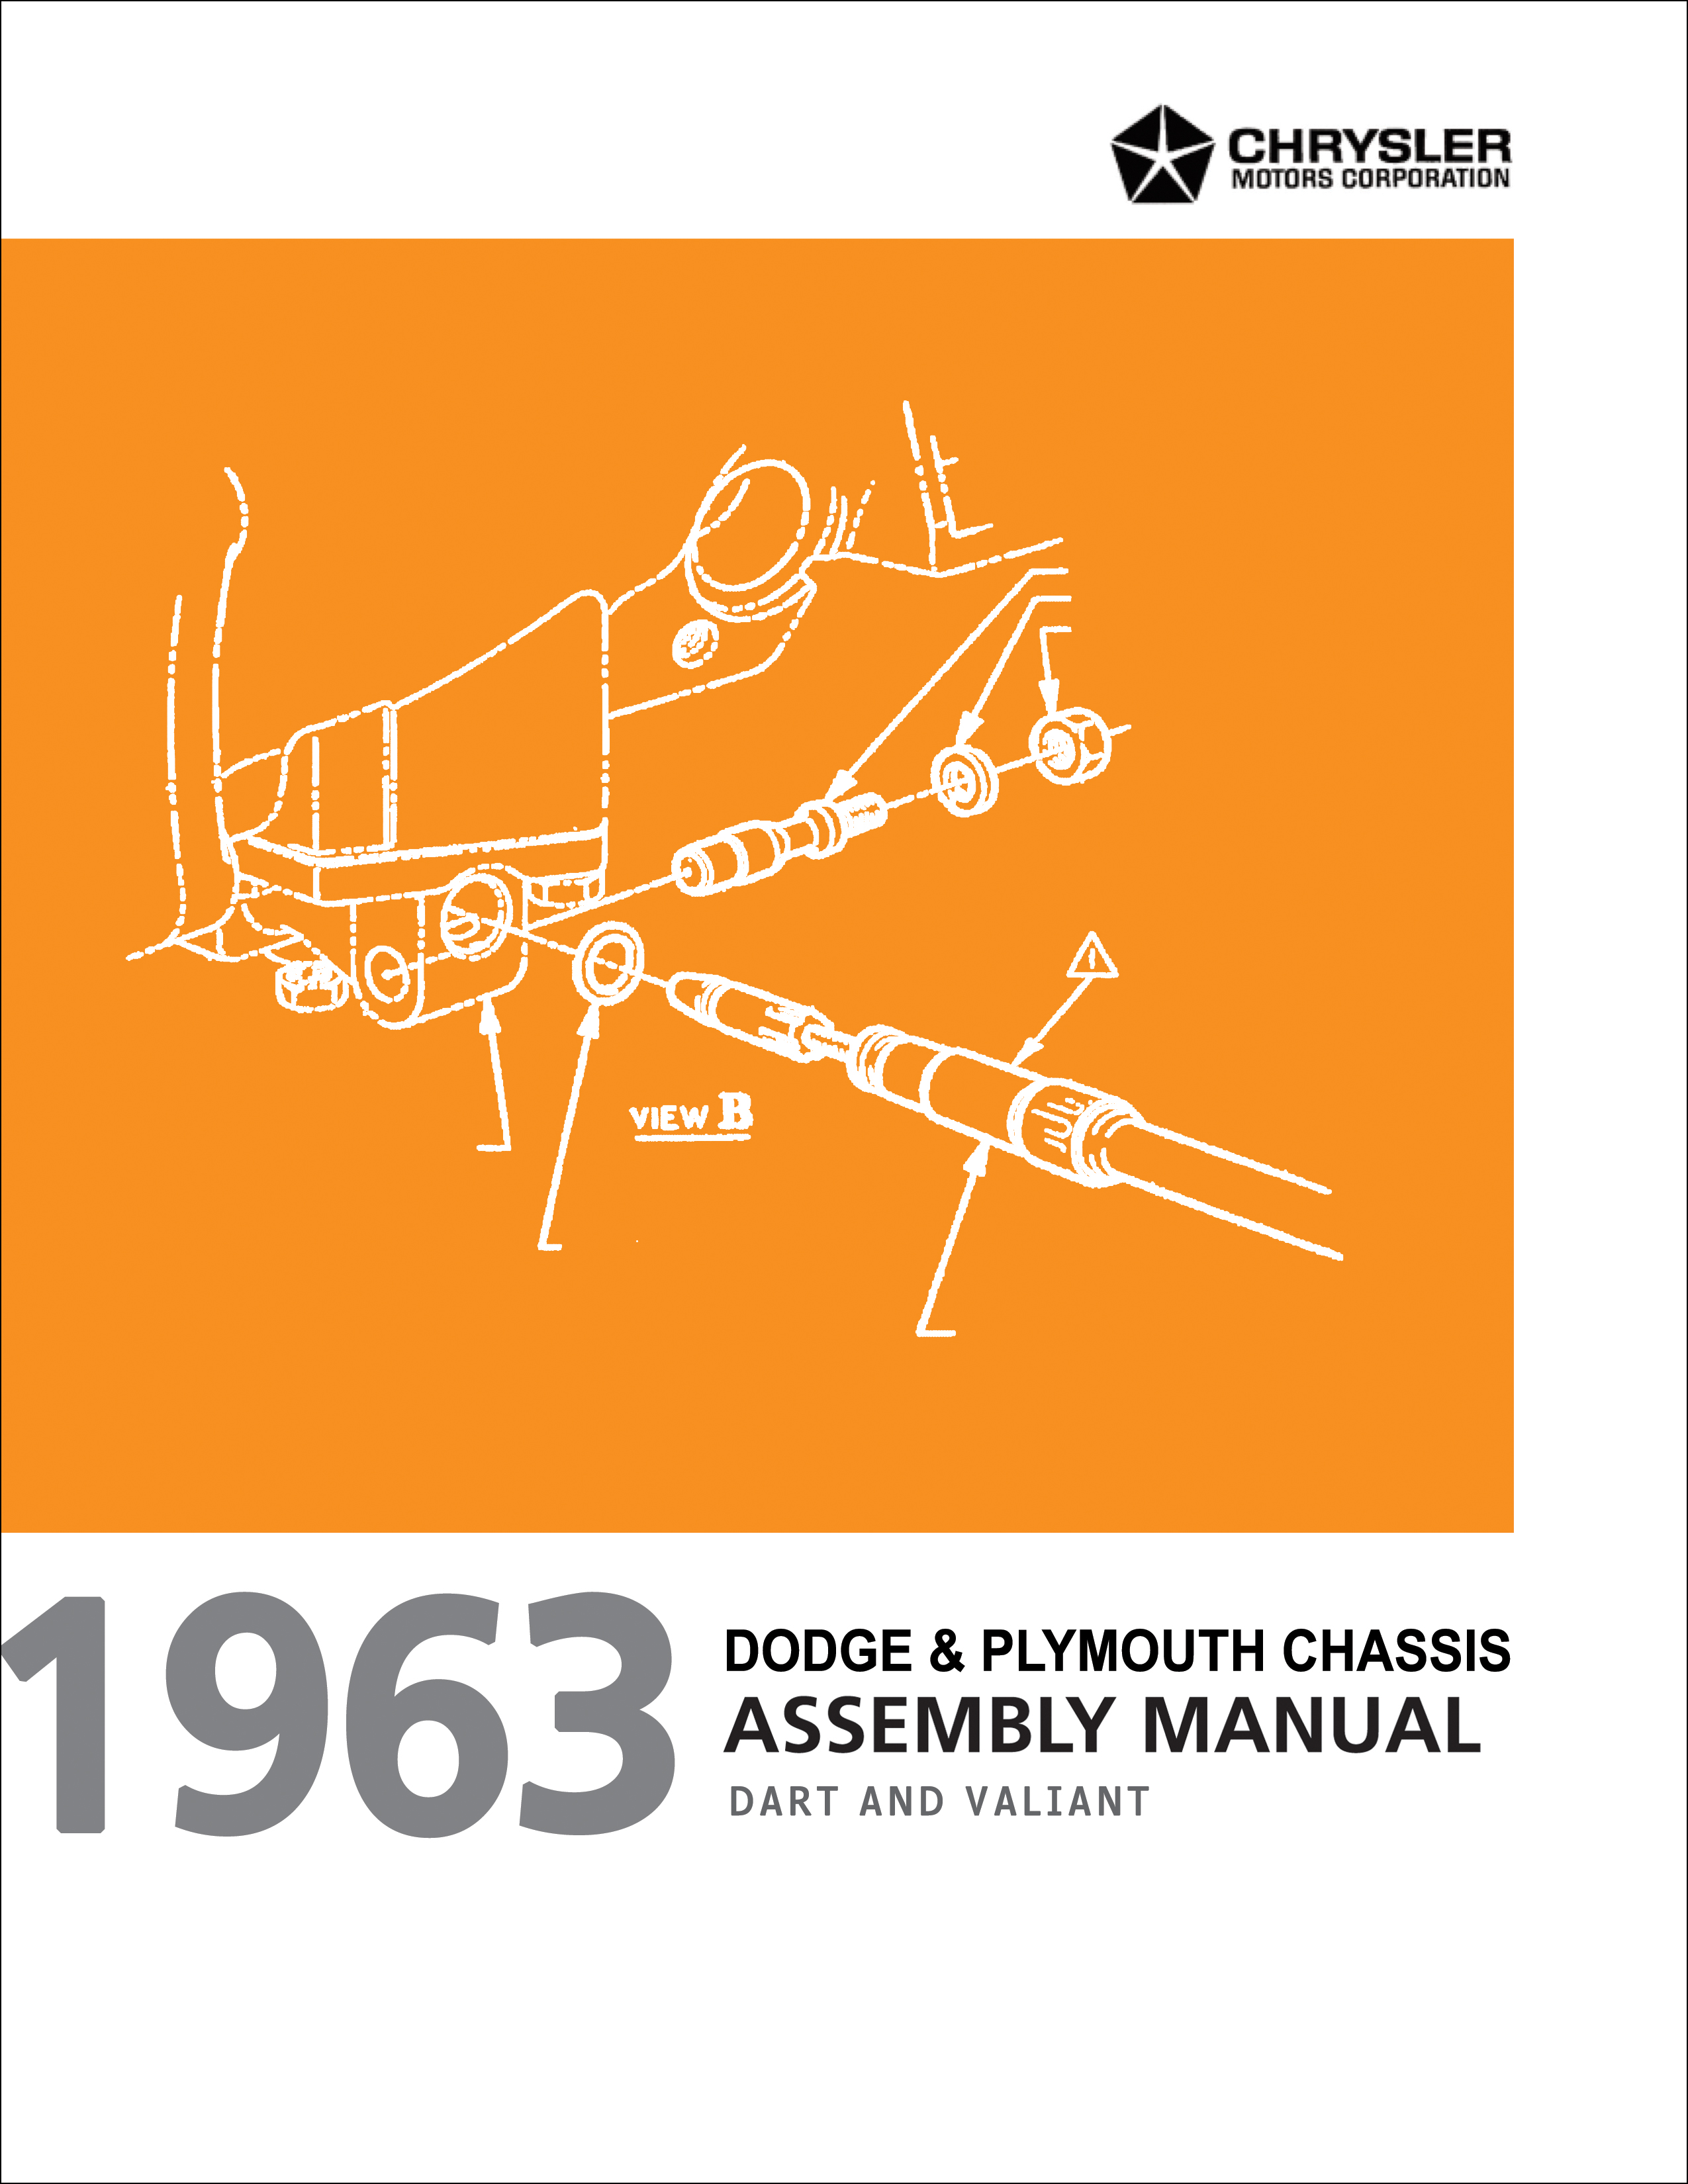 1963 Dart and Valiant Chassis Assembly Manual Reprint Dodge Plymouth